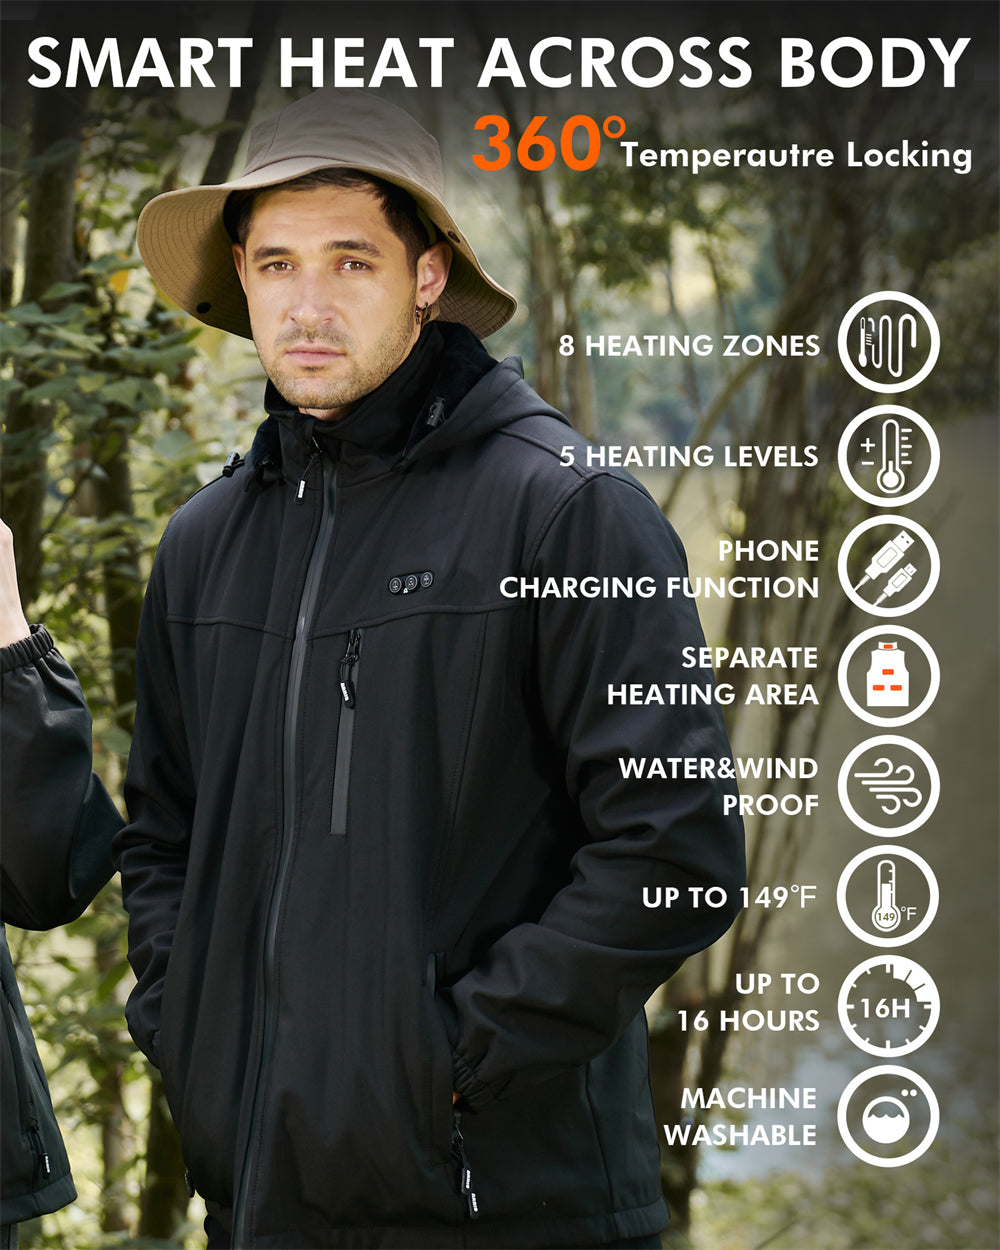 arris heated jacket for men comes with built-in over-heating protection module